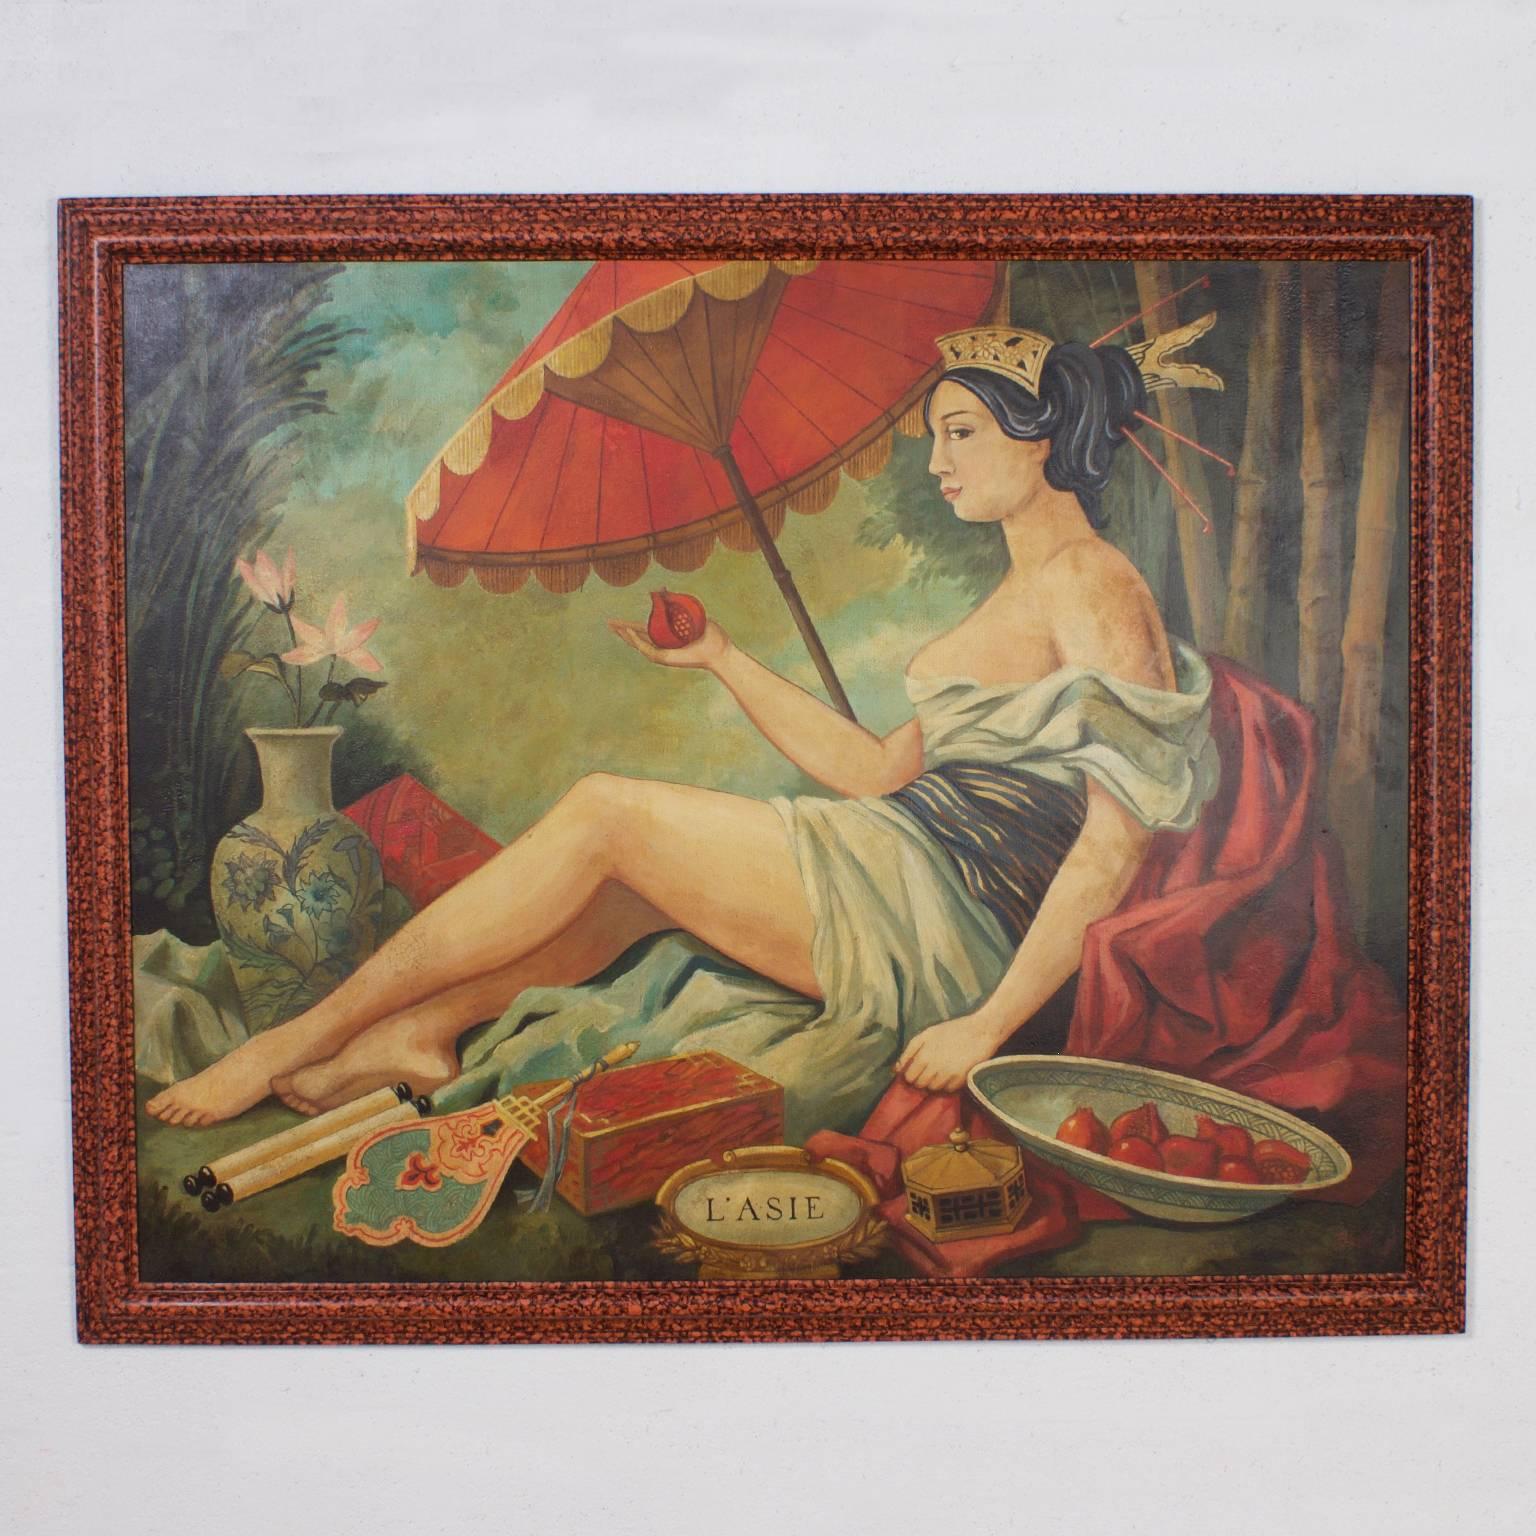 An unusual naive oil on canvas painting with a sensual and sultry feeling, offering an illusion of seduction and fertility in the symbolic pomegranate and red pallet painted by William Skilling (1862-1964). Titled L'Asie, perhaps a reference to the